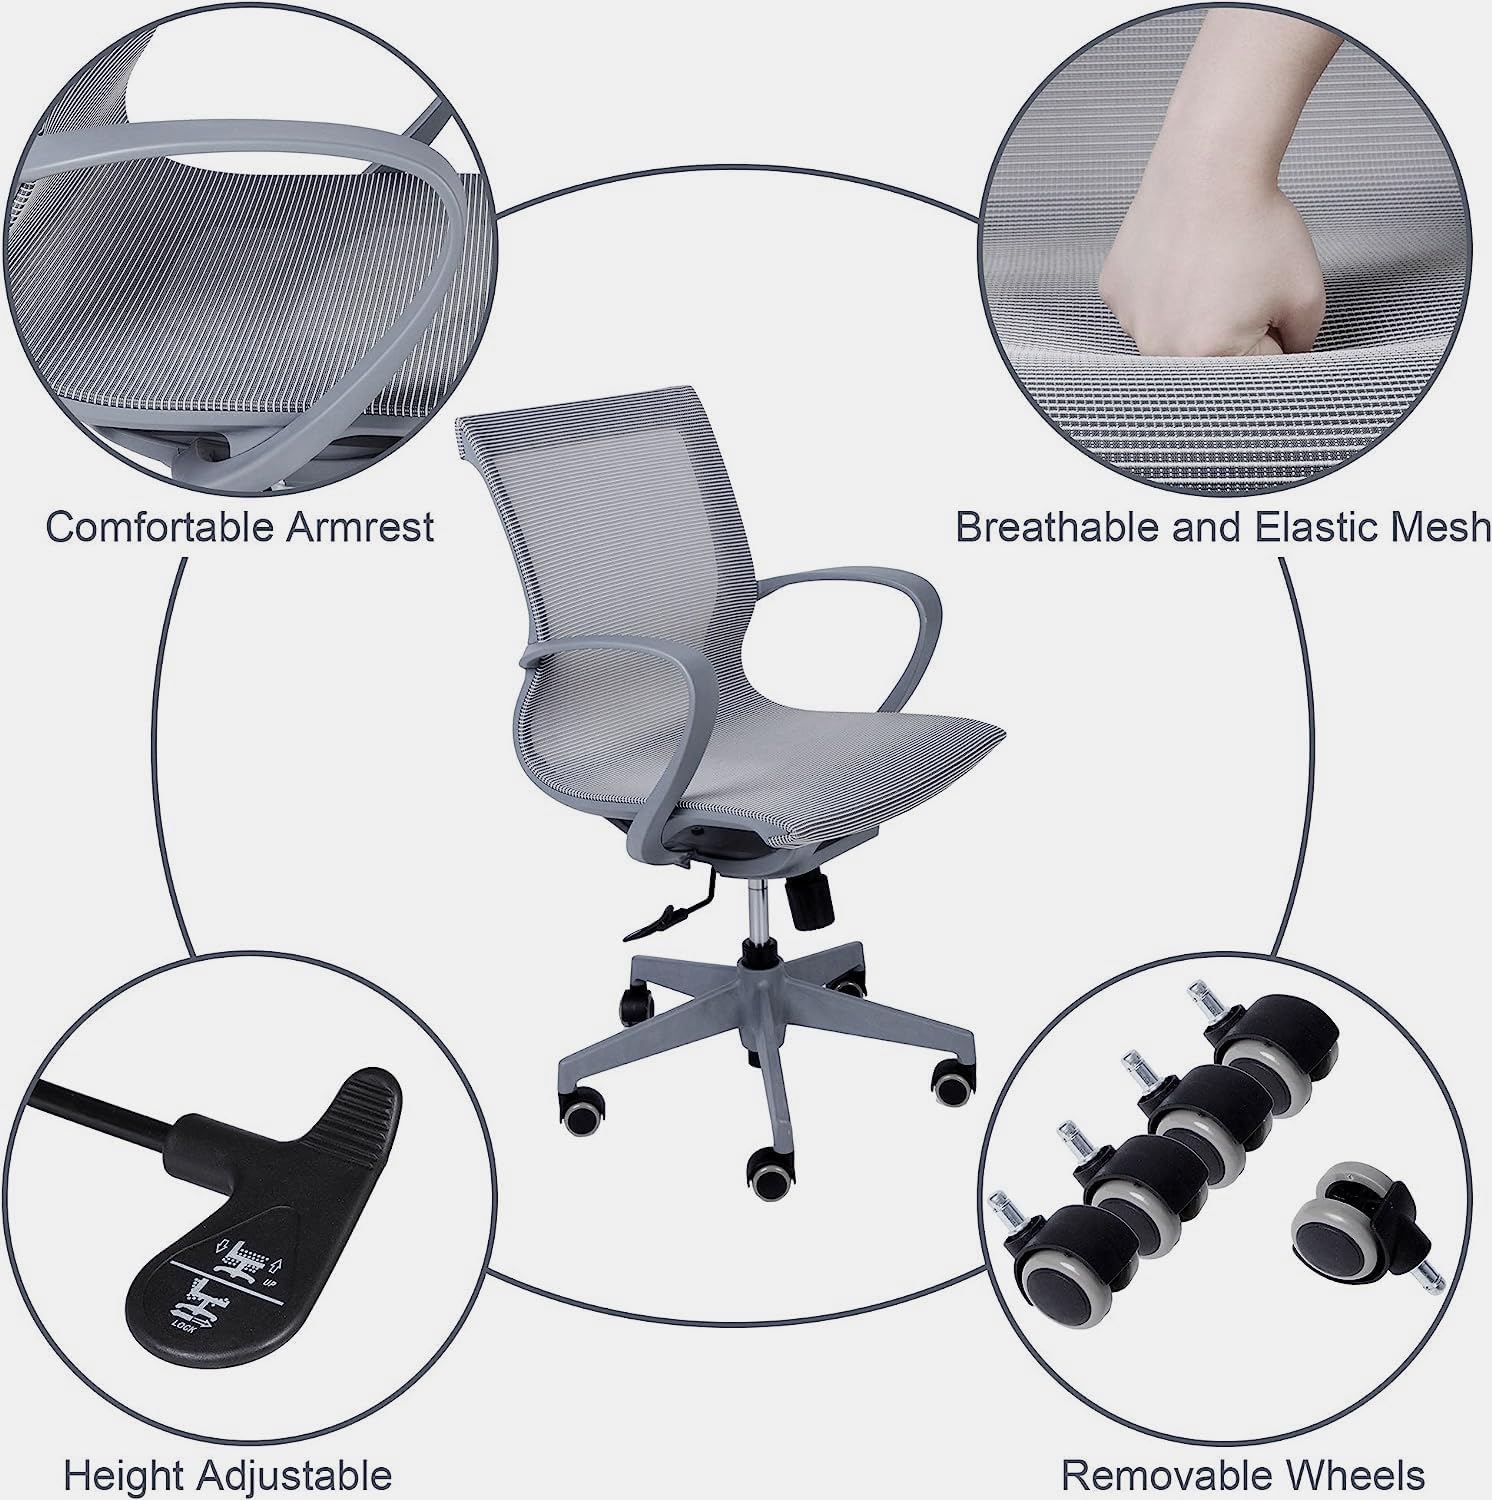 LUCKYERMORE Home Office Chair Mesh Chair Breathable Back Seat Height Adjustable, Gray